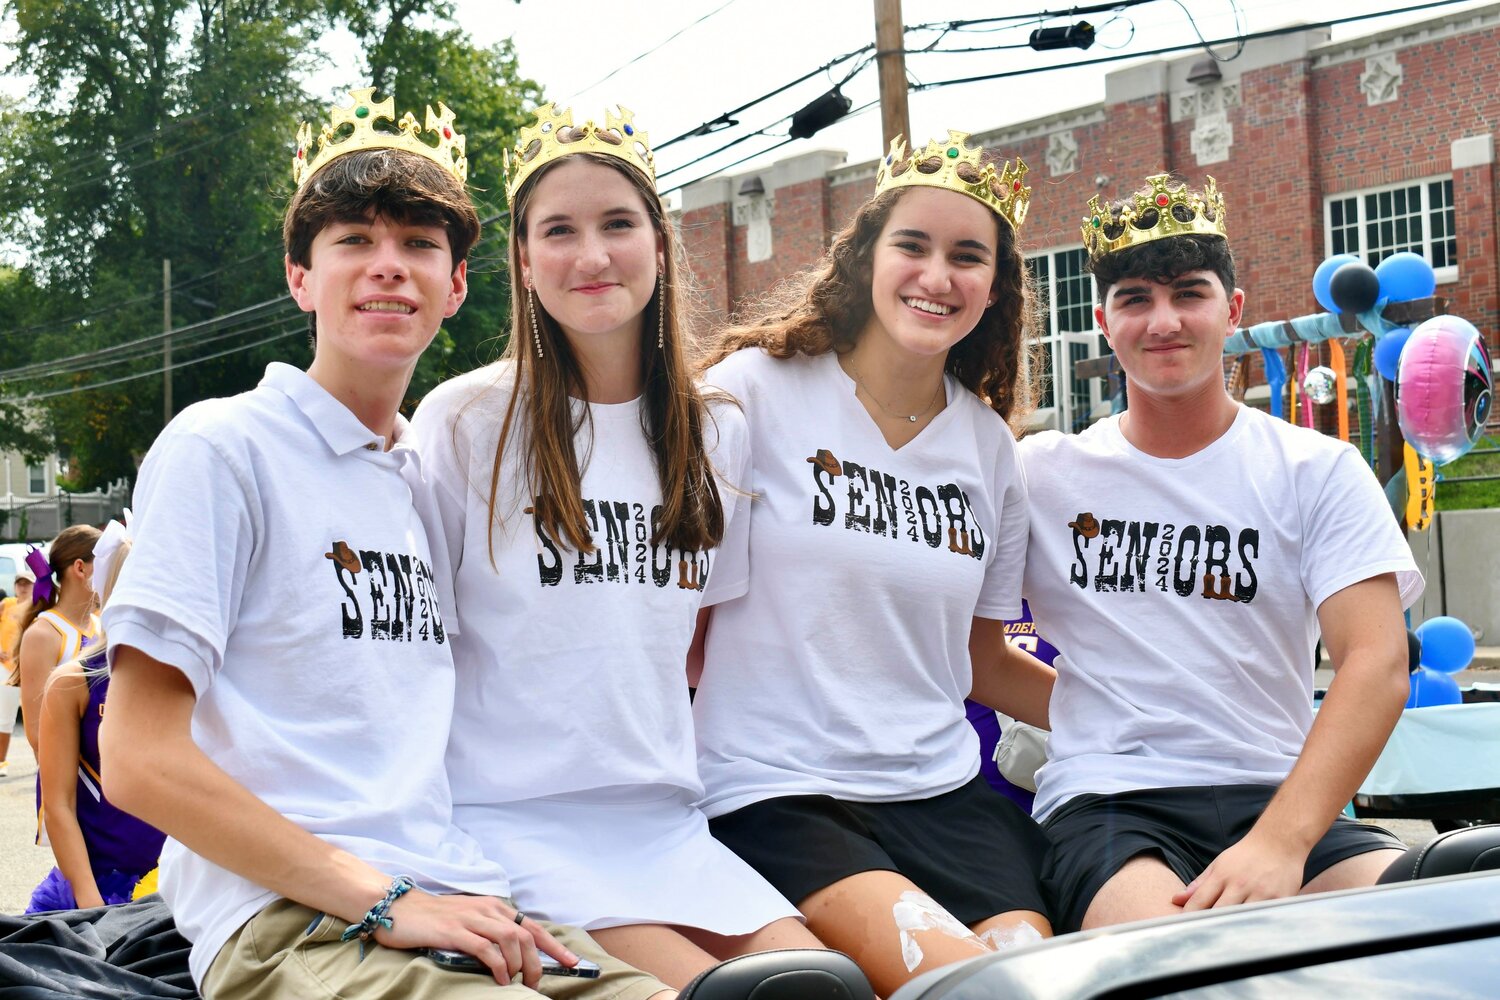 Oyster Bay High School seniors John Purcell, left, Ania Kelly, Kyra Sansone and Gianni Rizzuto were crowned homecoming royalty and participated in the homecoming parade.